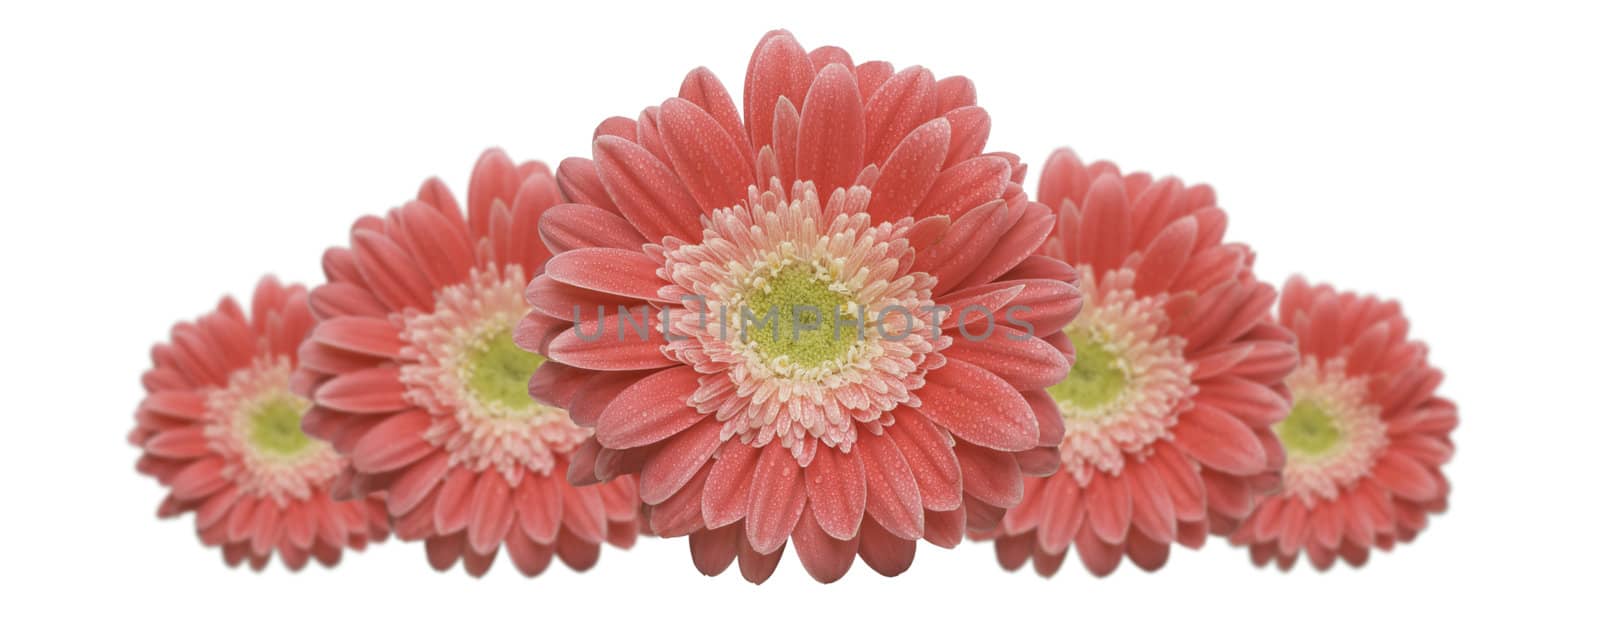 Gerber Daisy Row by Feverpitched